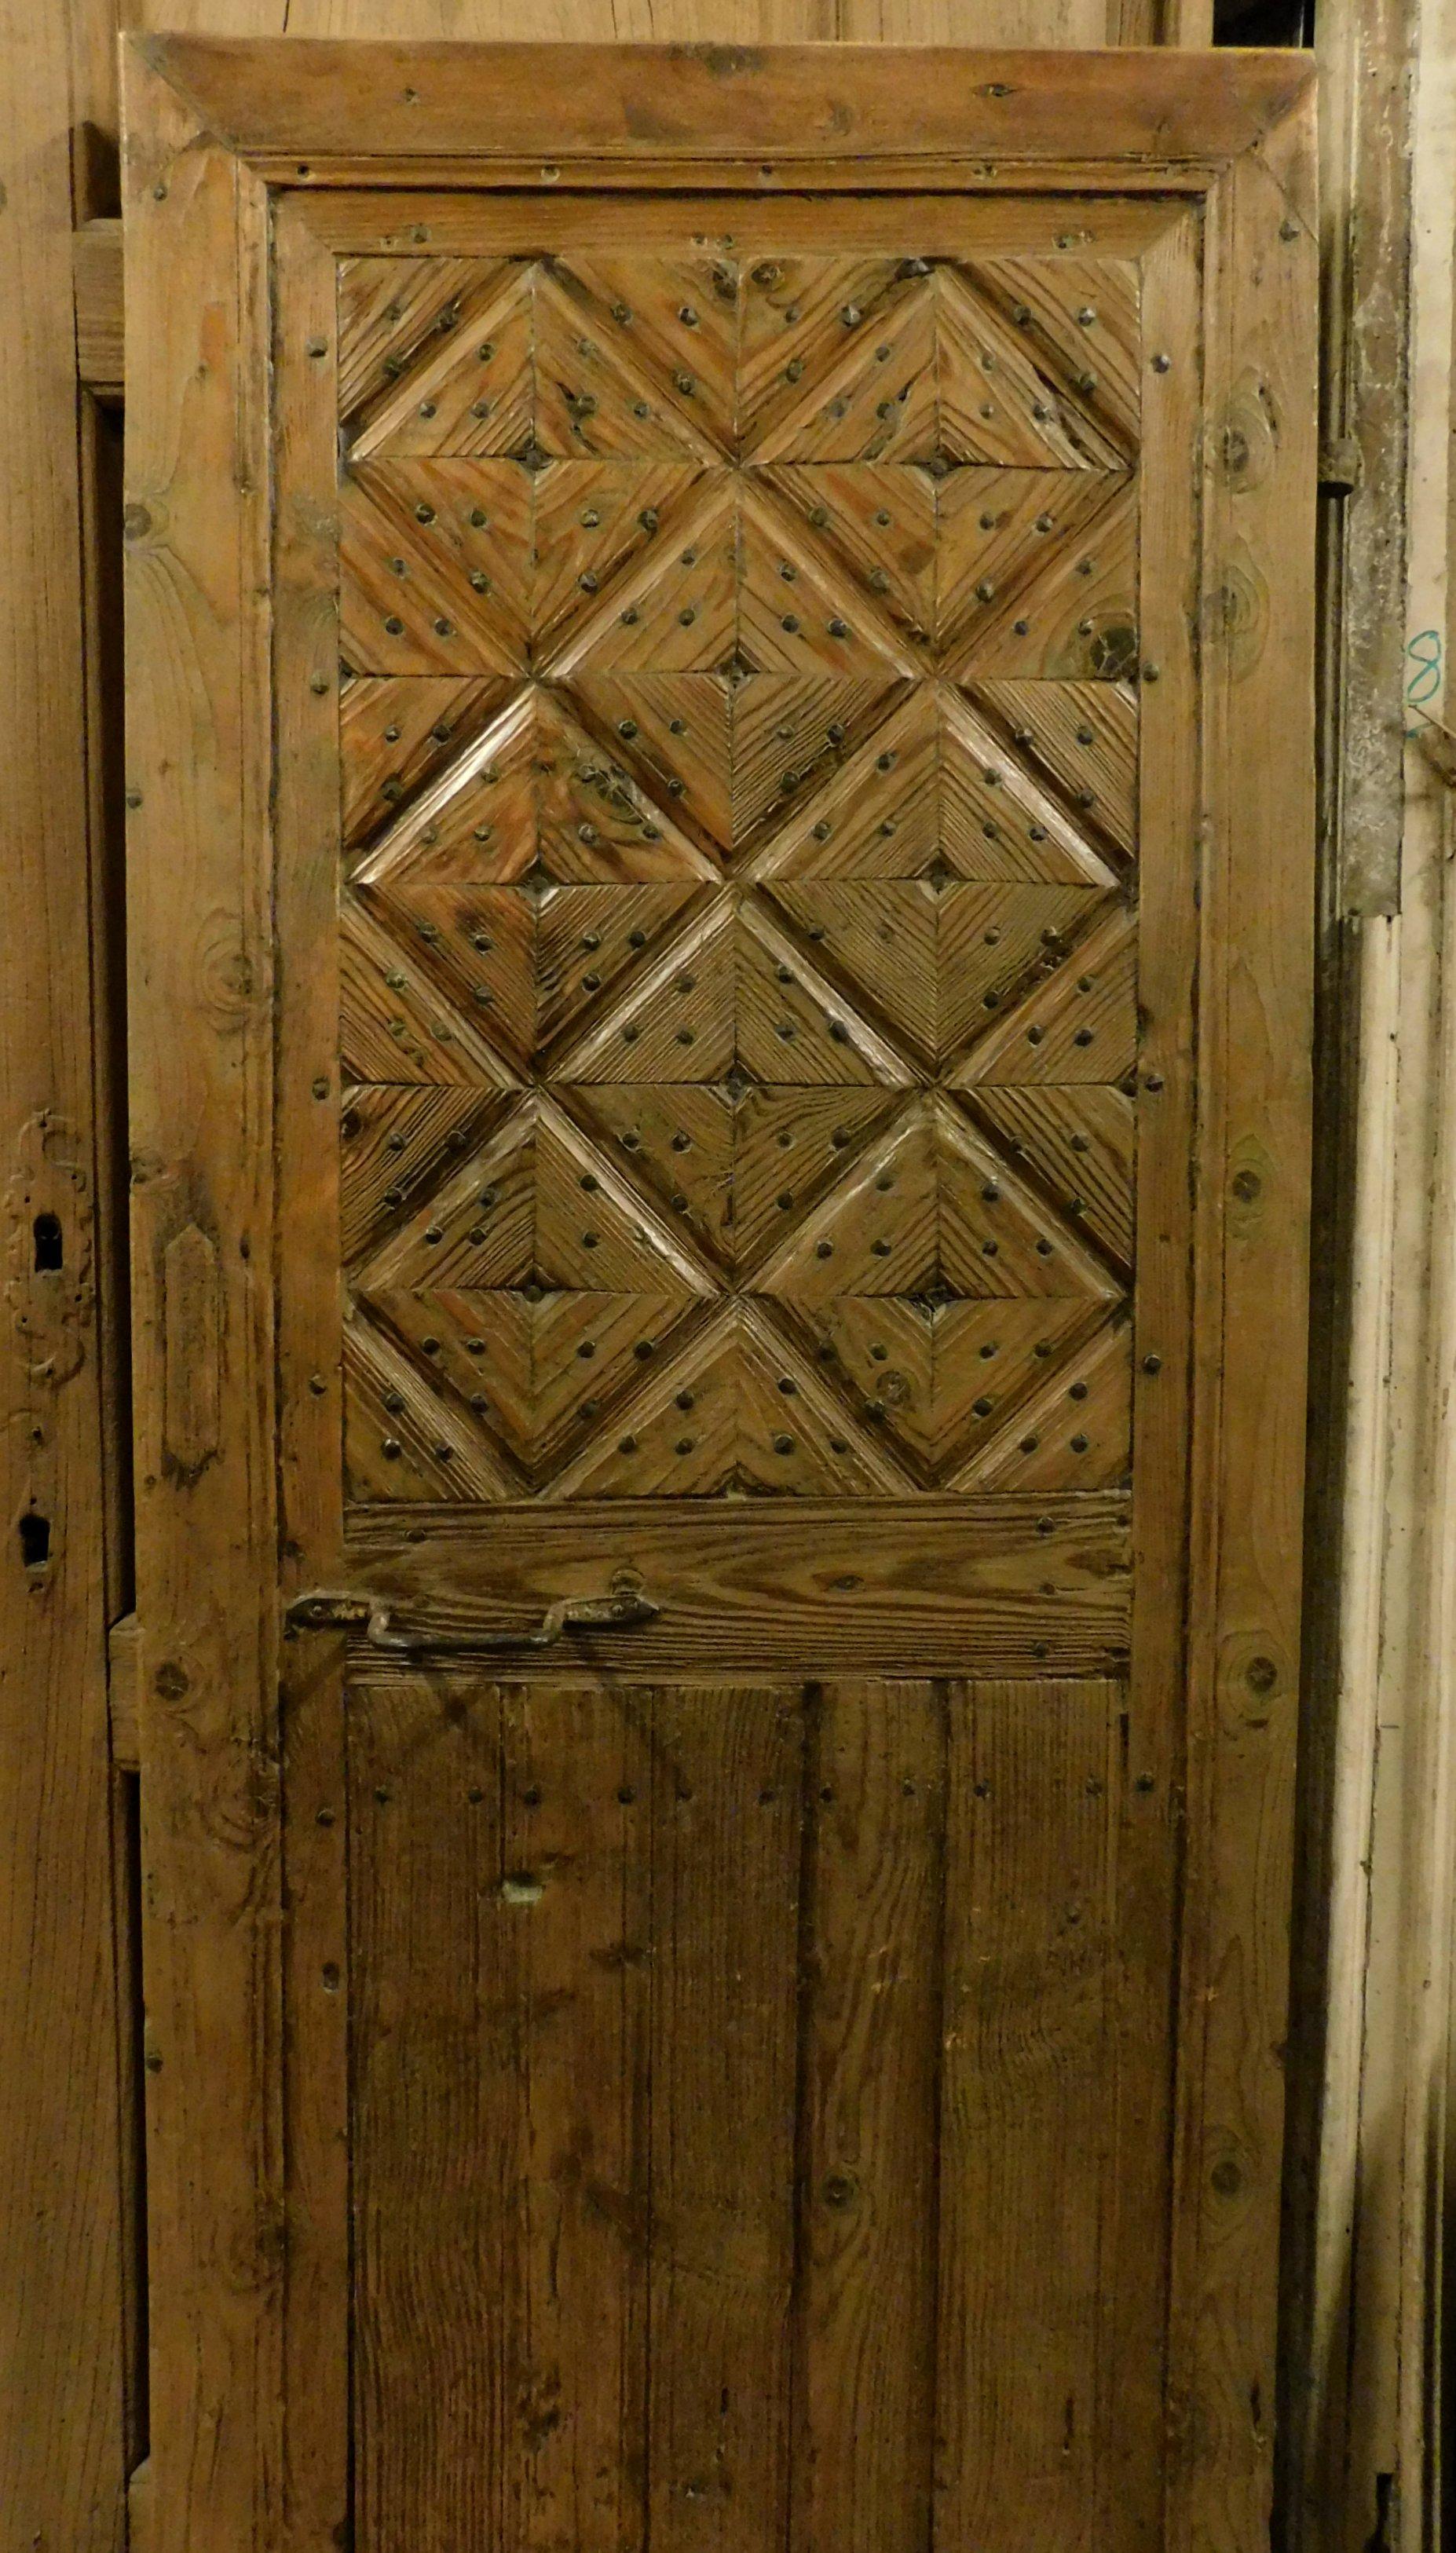 Antique rustic door in blond larch, yellowish color with natural wood effect, sculpted with geometric effects, give prominence and rusticity to a door that could be introduced into a mountain chalet with its own elegance and character. Italian